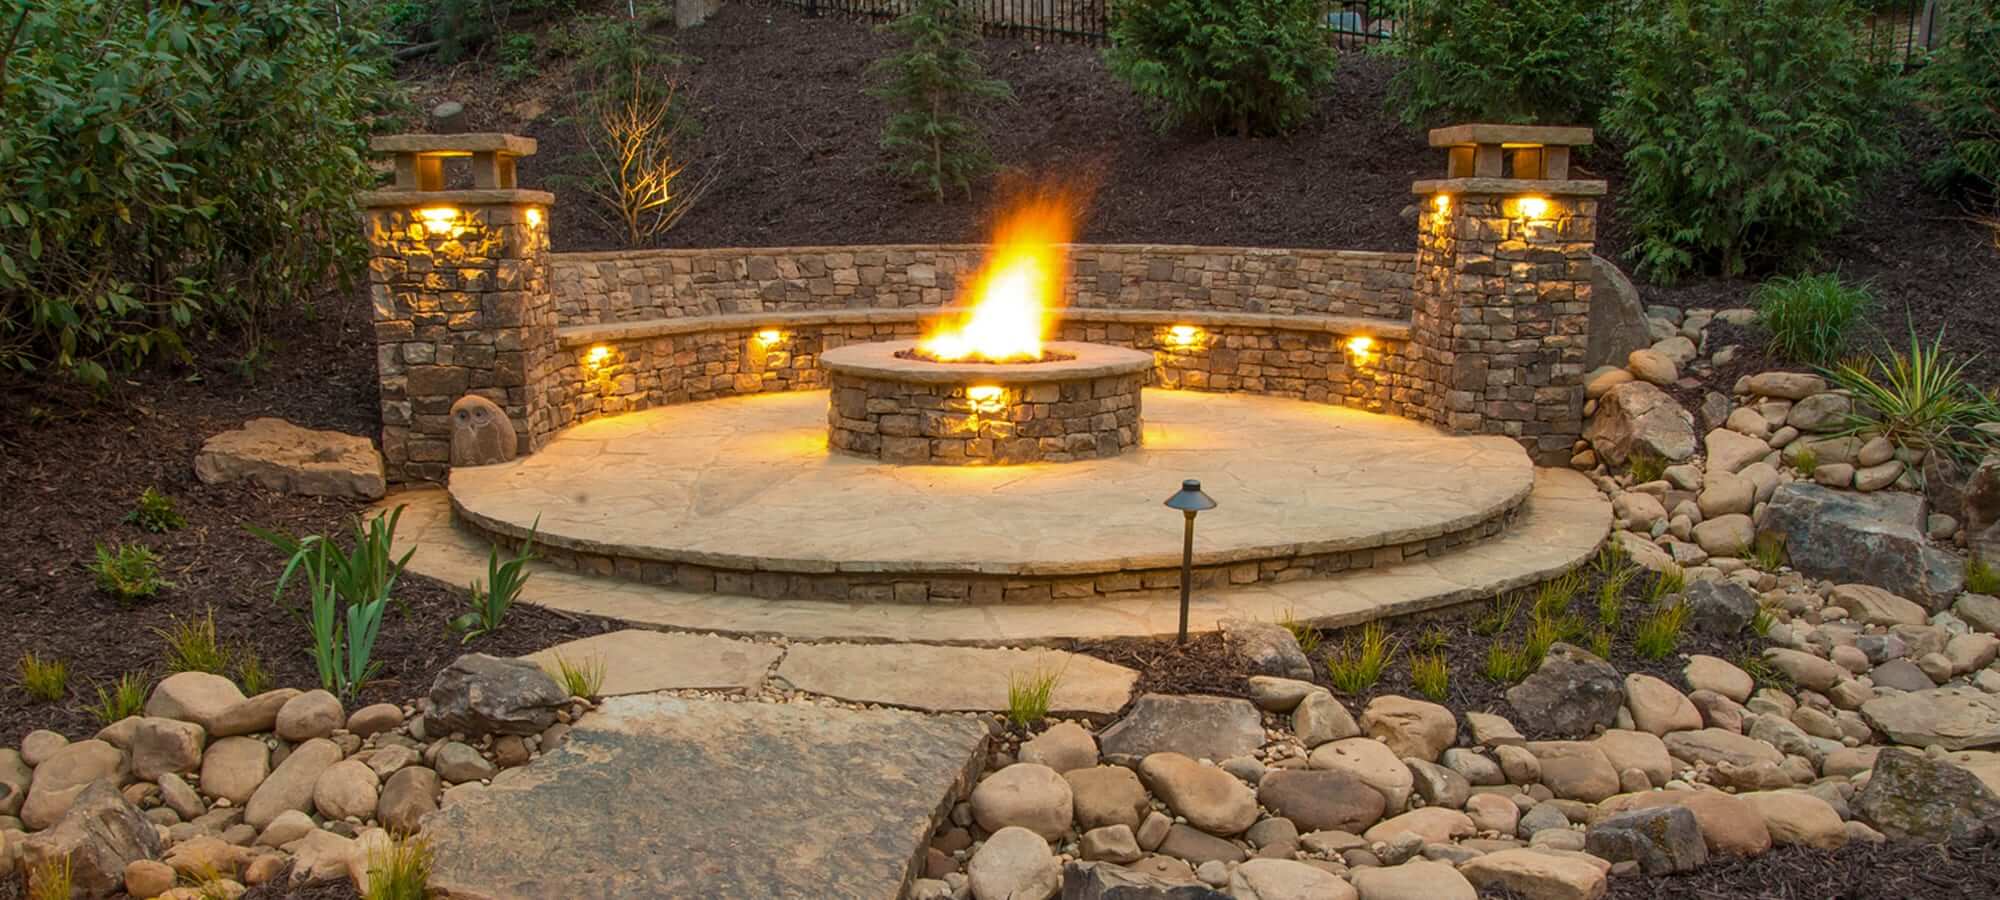 Outdoor Makeover : Benefits of Adding an Outdoor Fire Feature to Your Landscape